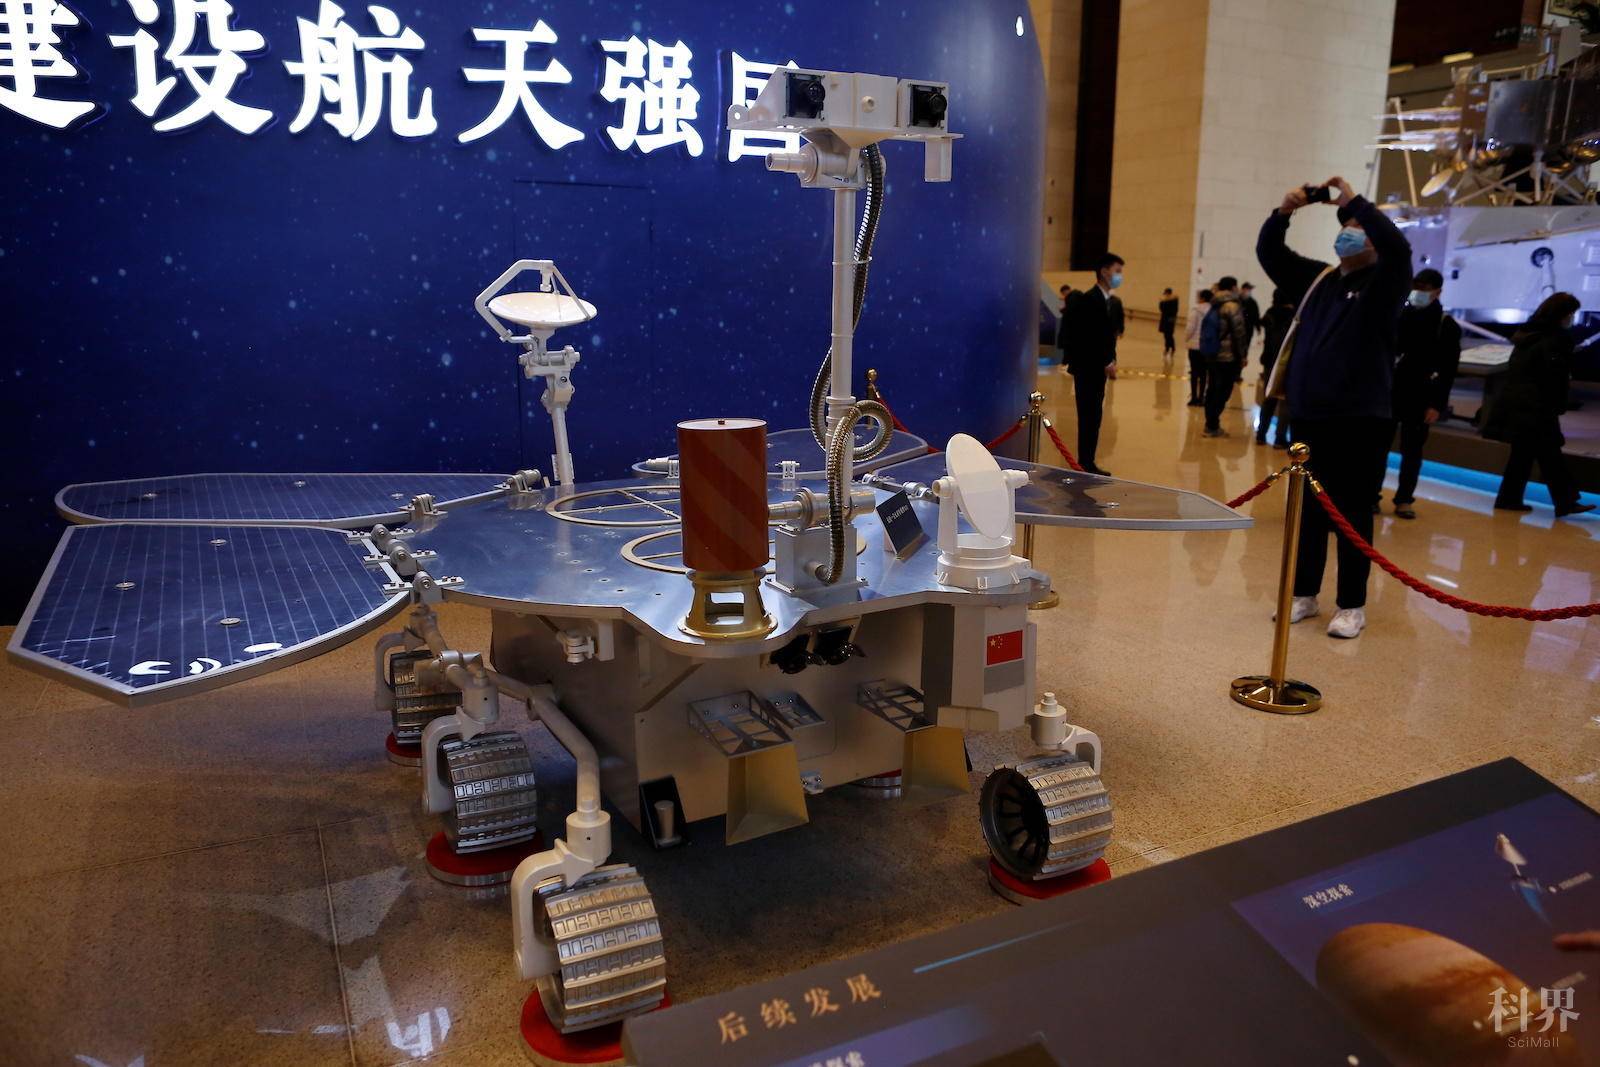 A replica of the Tianwen-1 Mars rover is displayed during an exhibition inside the National Museum in Beijing, China March 3, 2021. REUTERS/Tingshu Wang - RC2N3M9NS23I